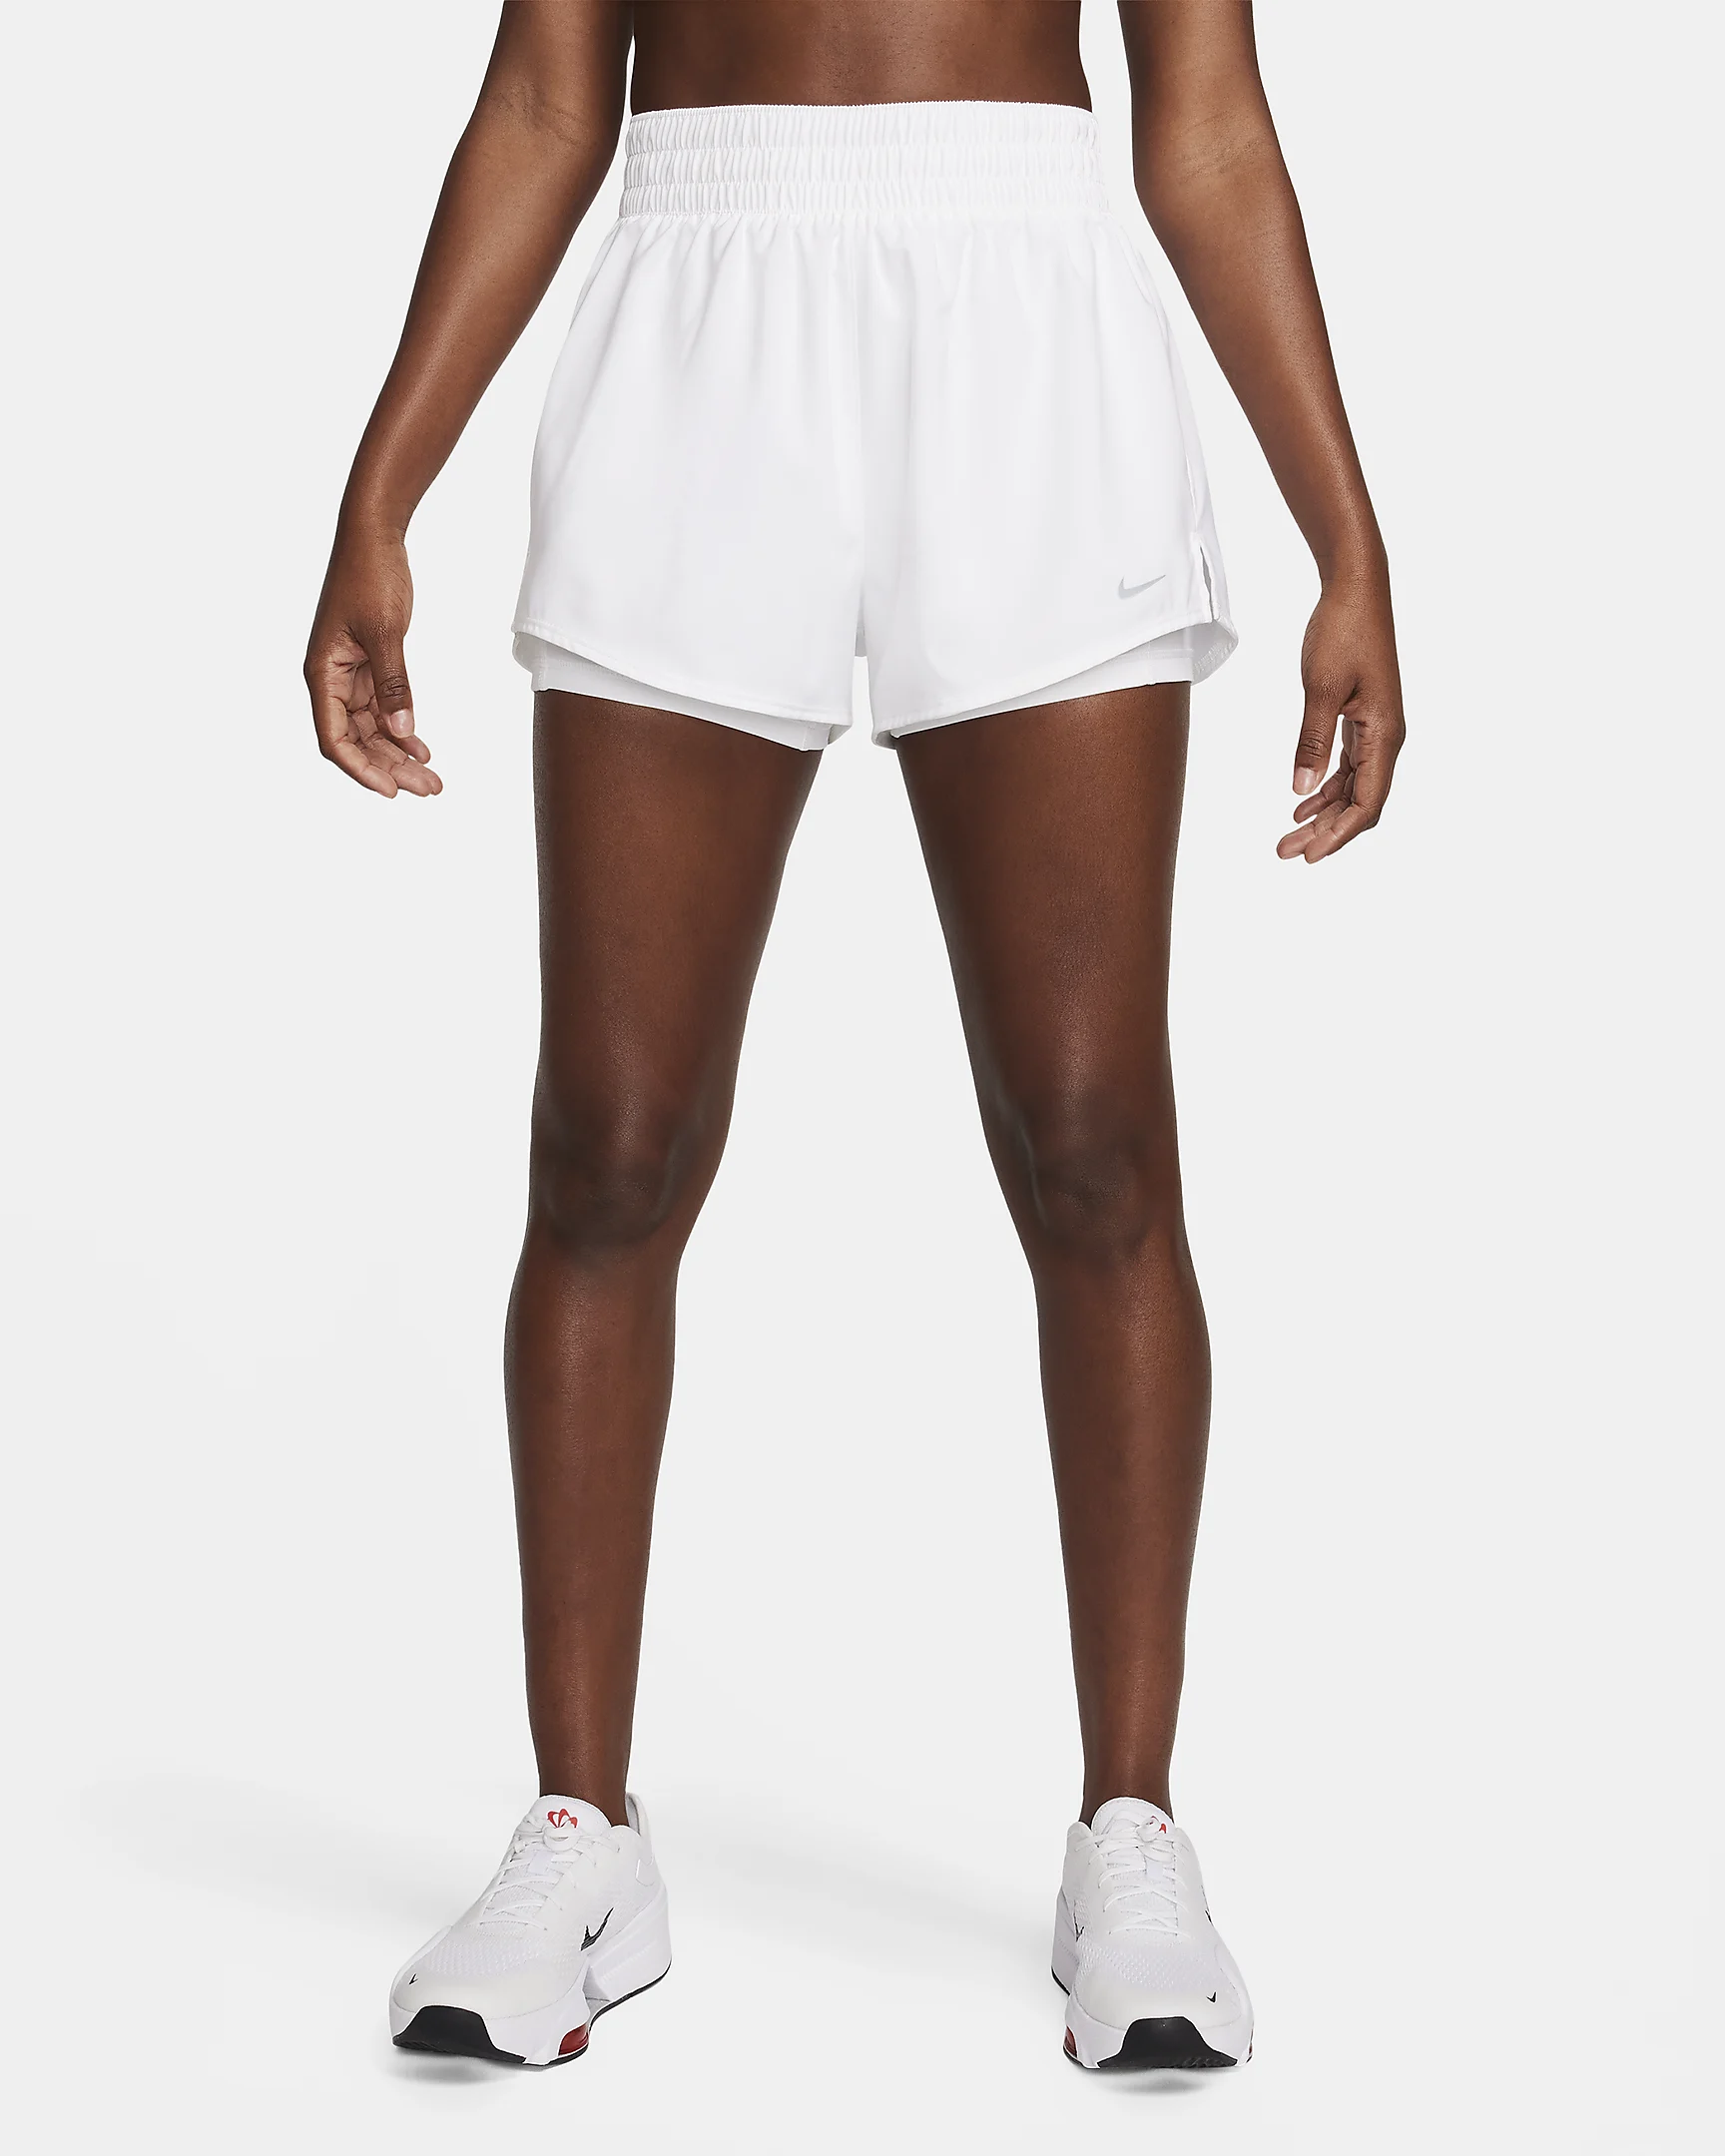 Nike-one-womens-dri-fit-high-waisted-3-2-in-1-shorts-front